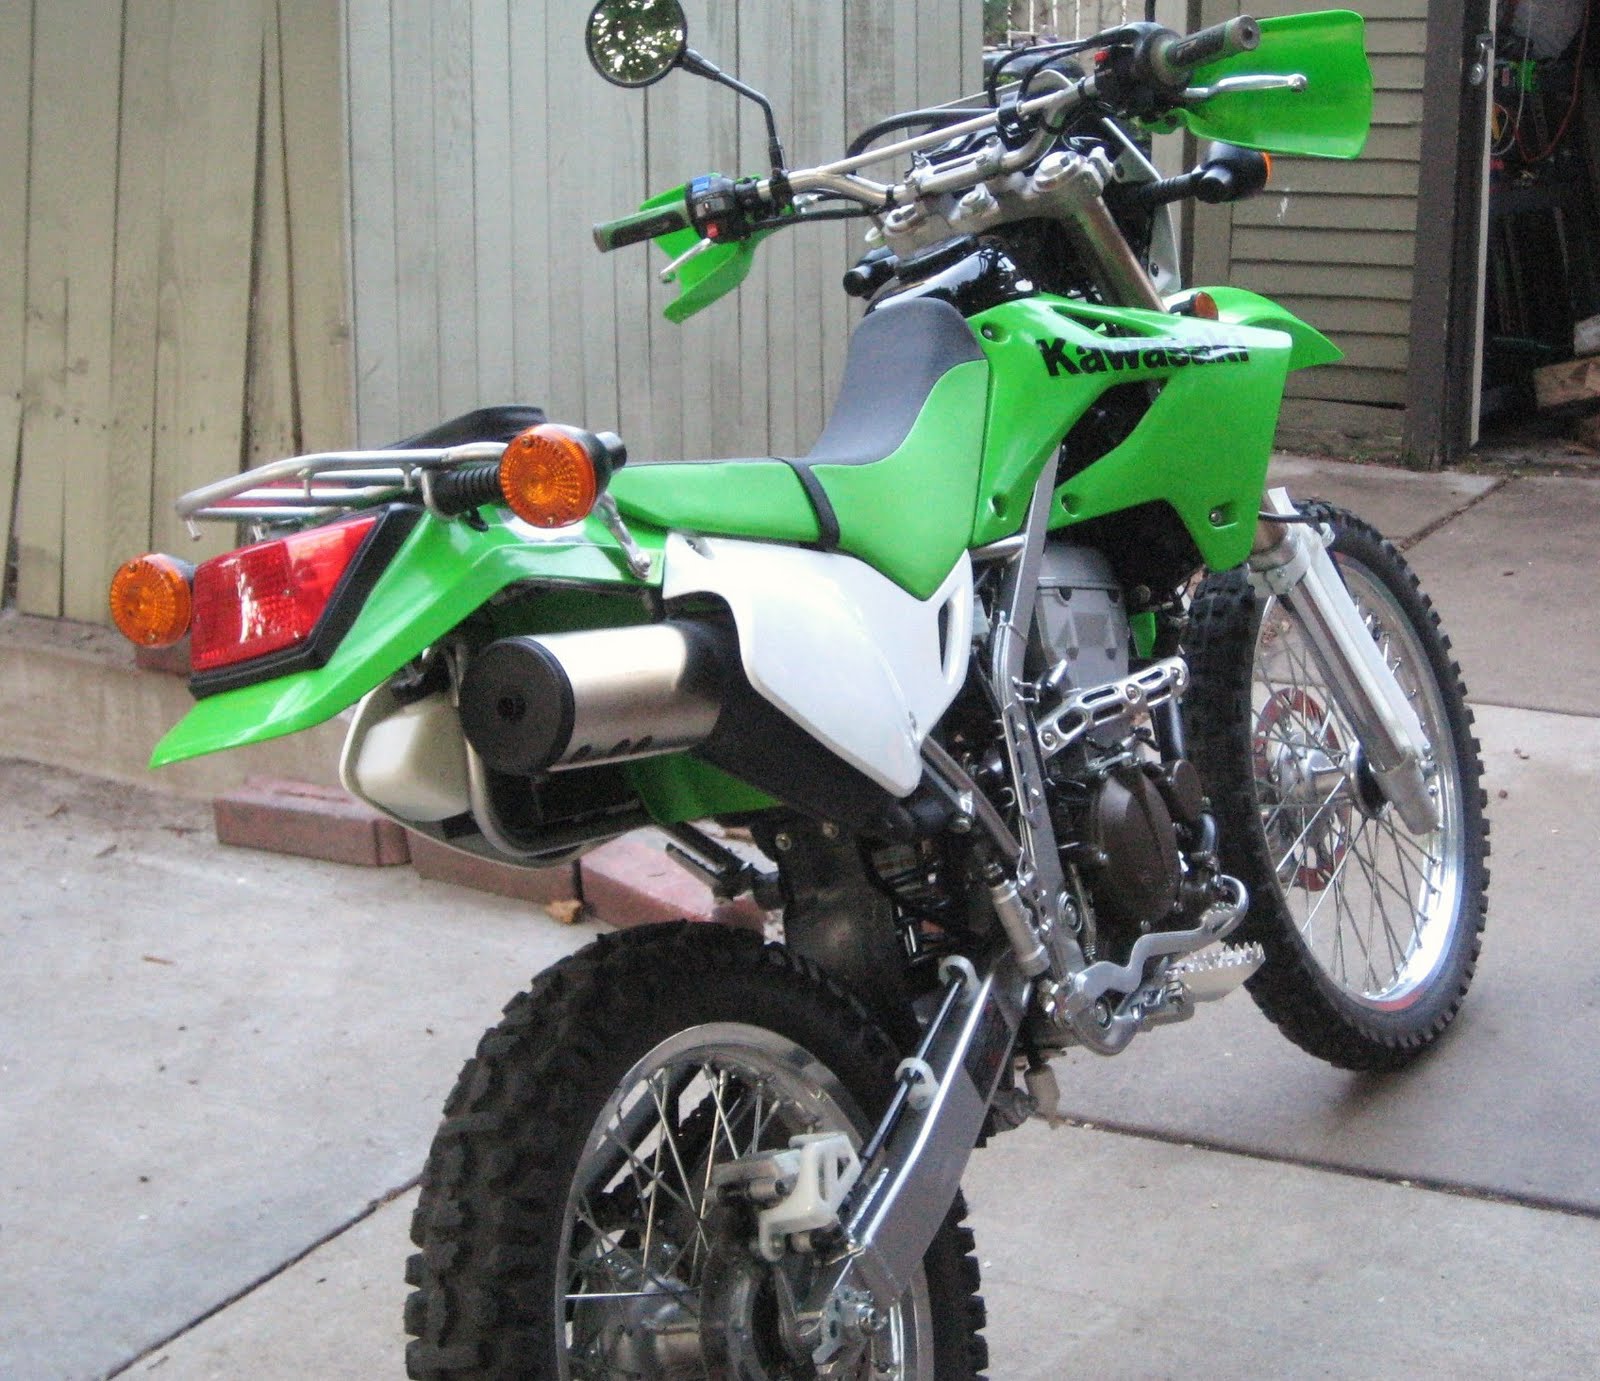 yamaha enduro 350 1100 miles of riding the KLX 250 this summer and a few memories of the 